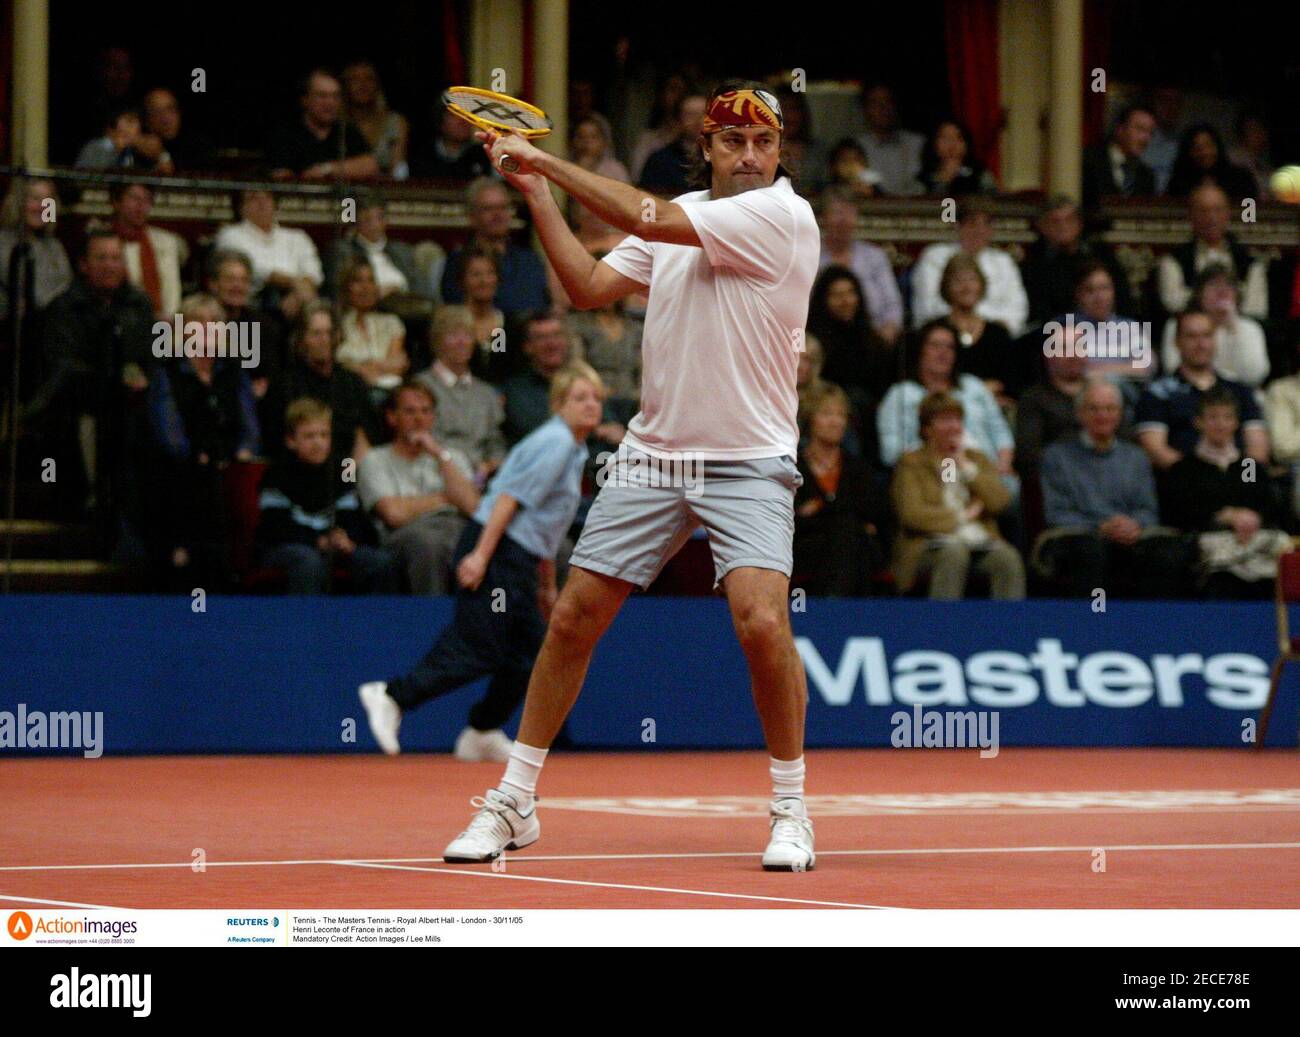 Tennis - The Masters Tennis - Royal Albert Hall - London - 30/11/05 Henri  Leconte of France in action Mandatory Credit: Action Images / Lee Mills  Stock Photo - Alamy